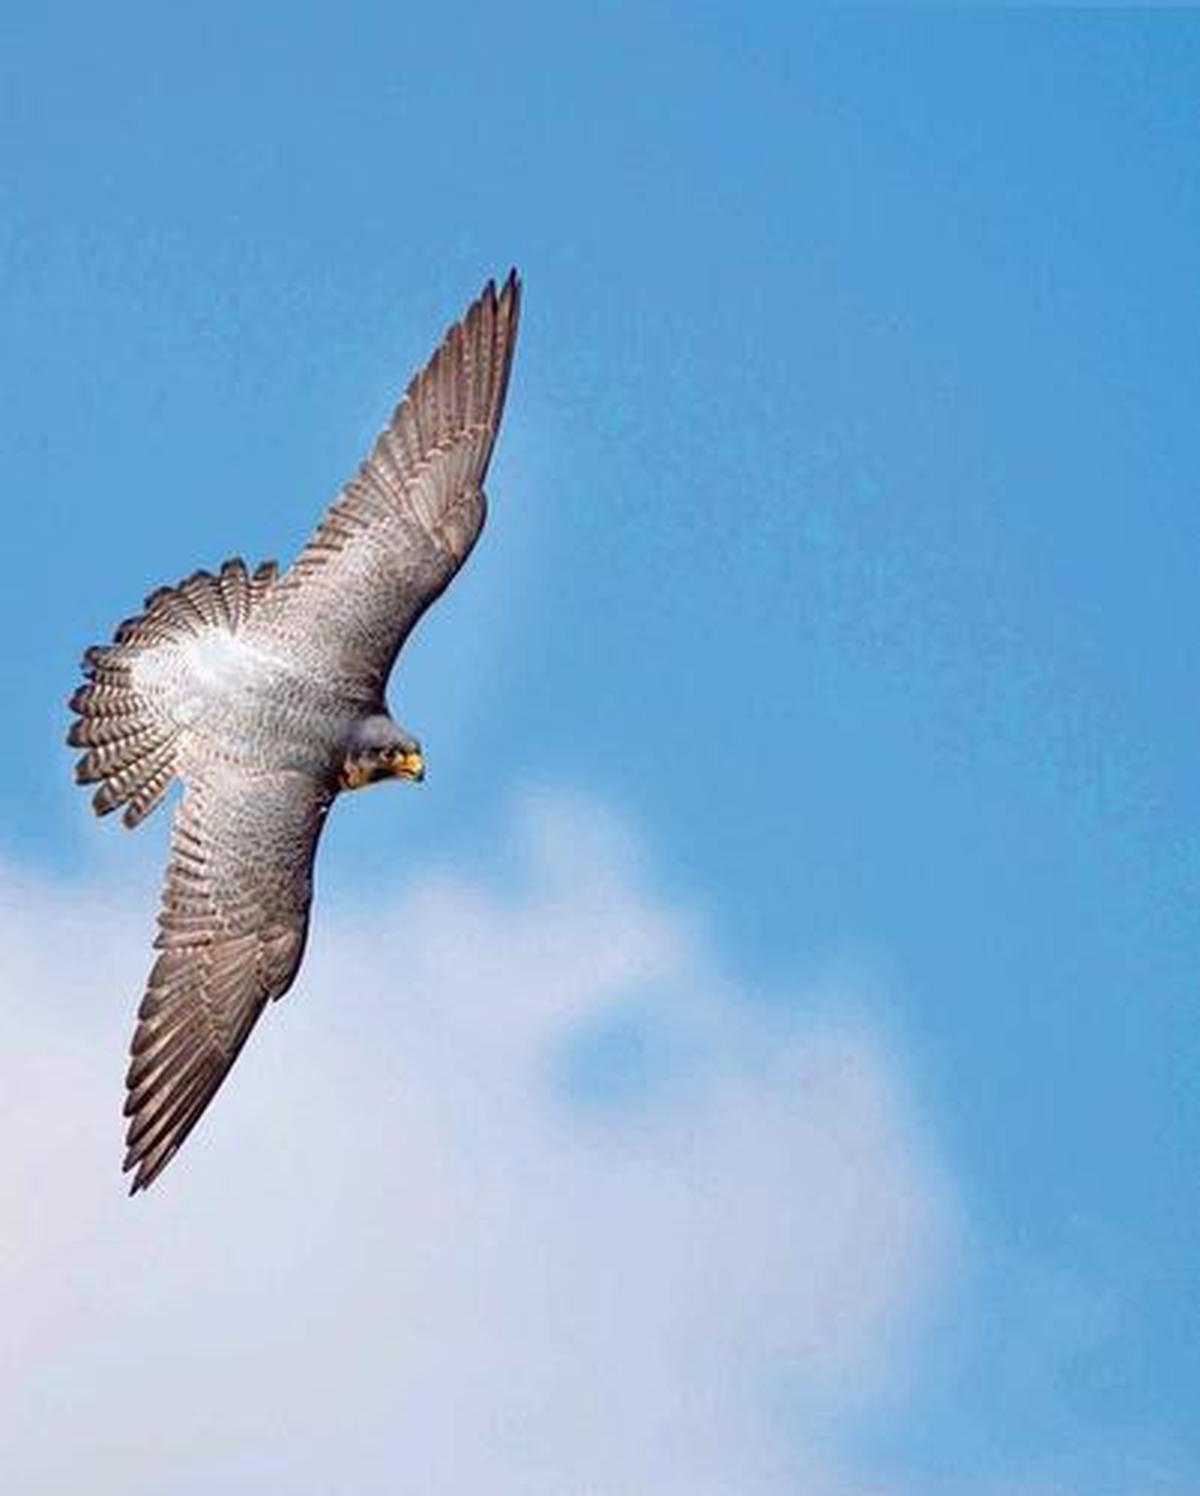 Peregrine falcon benching against cloudy blue sky